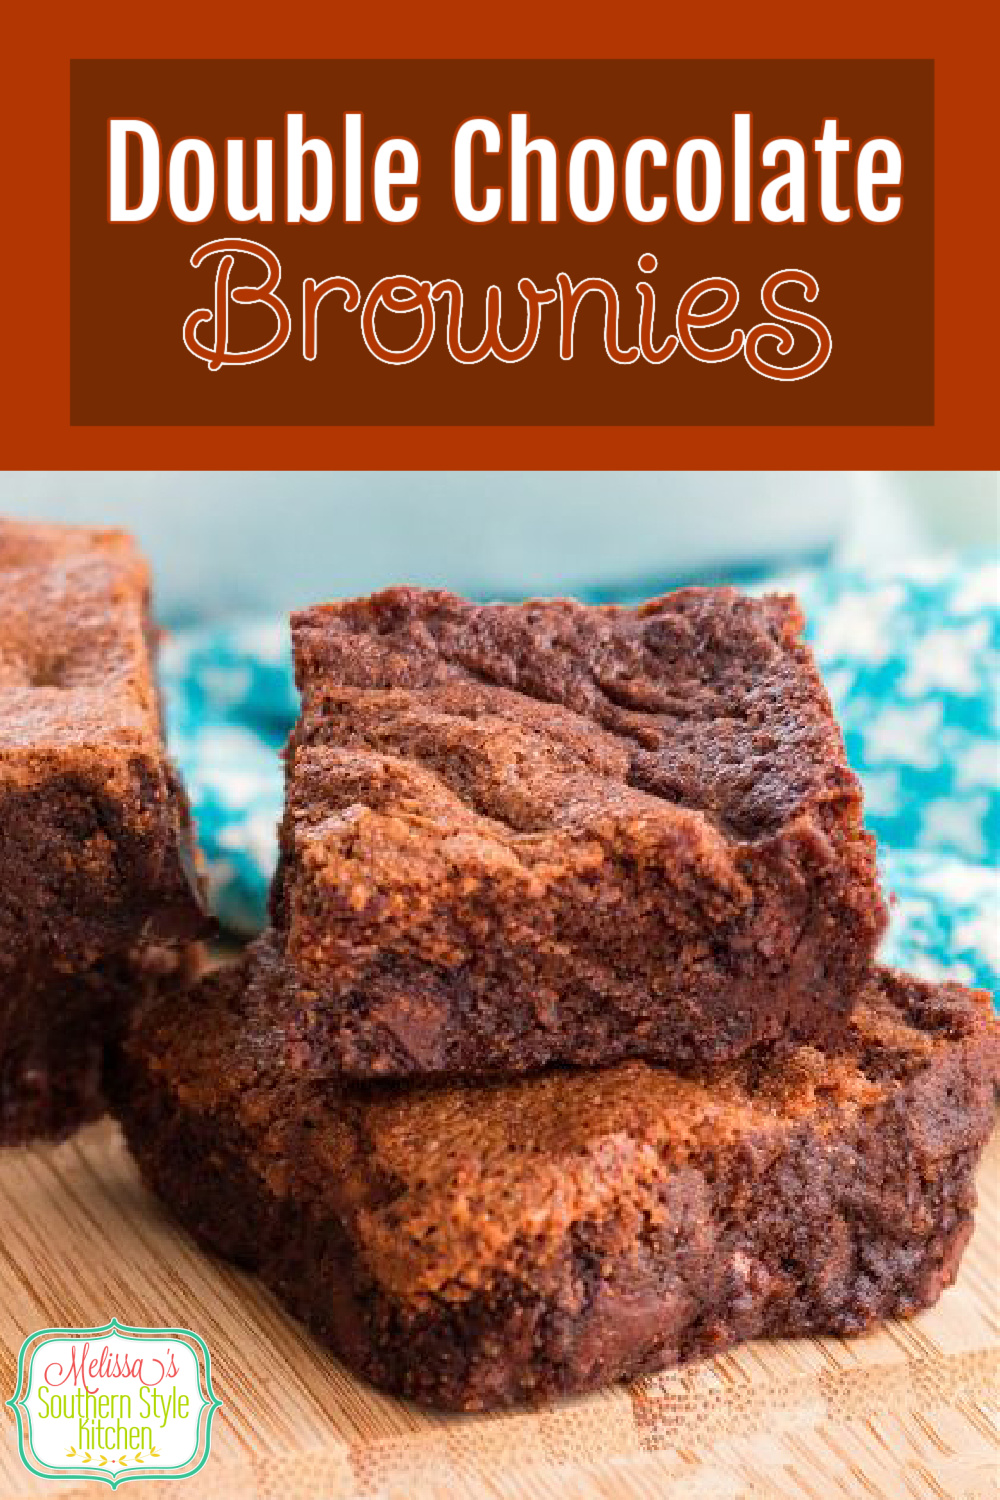 What's better than a chocolate brownie? Double Chocolate Brownies! #brownies #doublechocolatebrownies #browniesrecipes #homemadebrownies #easybrownies #desserts #easyrecipes #chocolate #chocolatedesserts